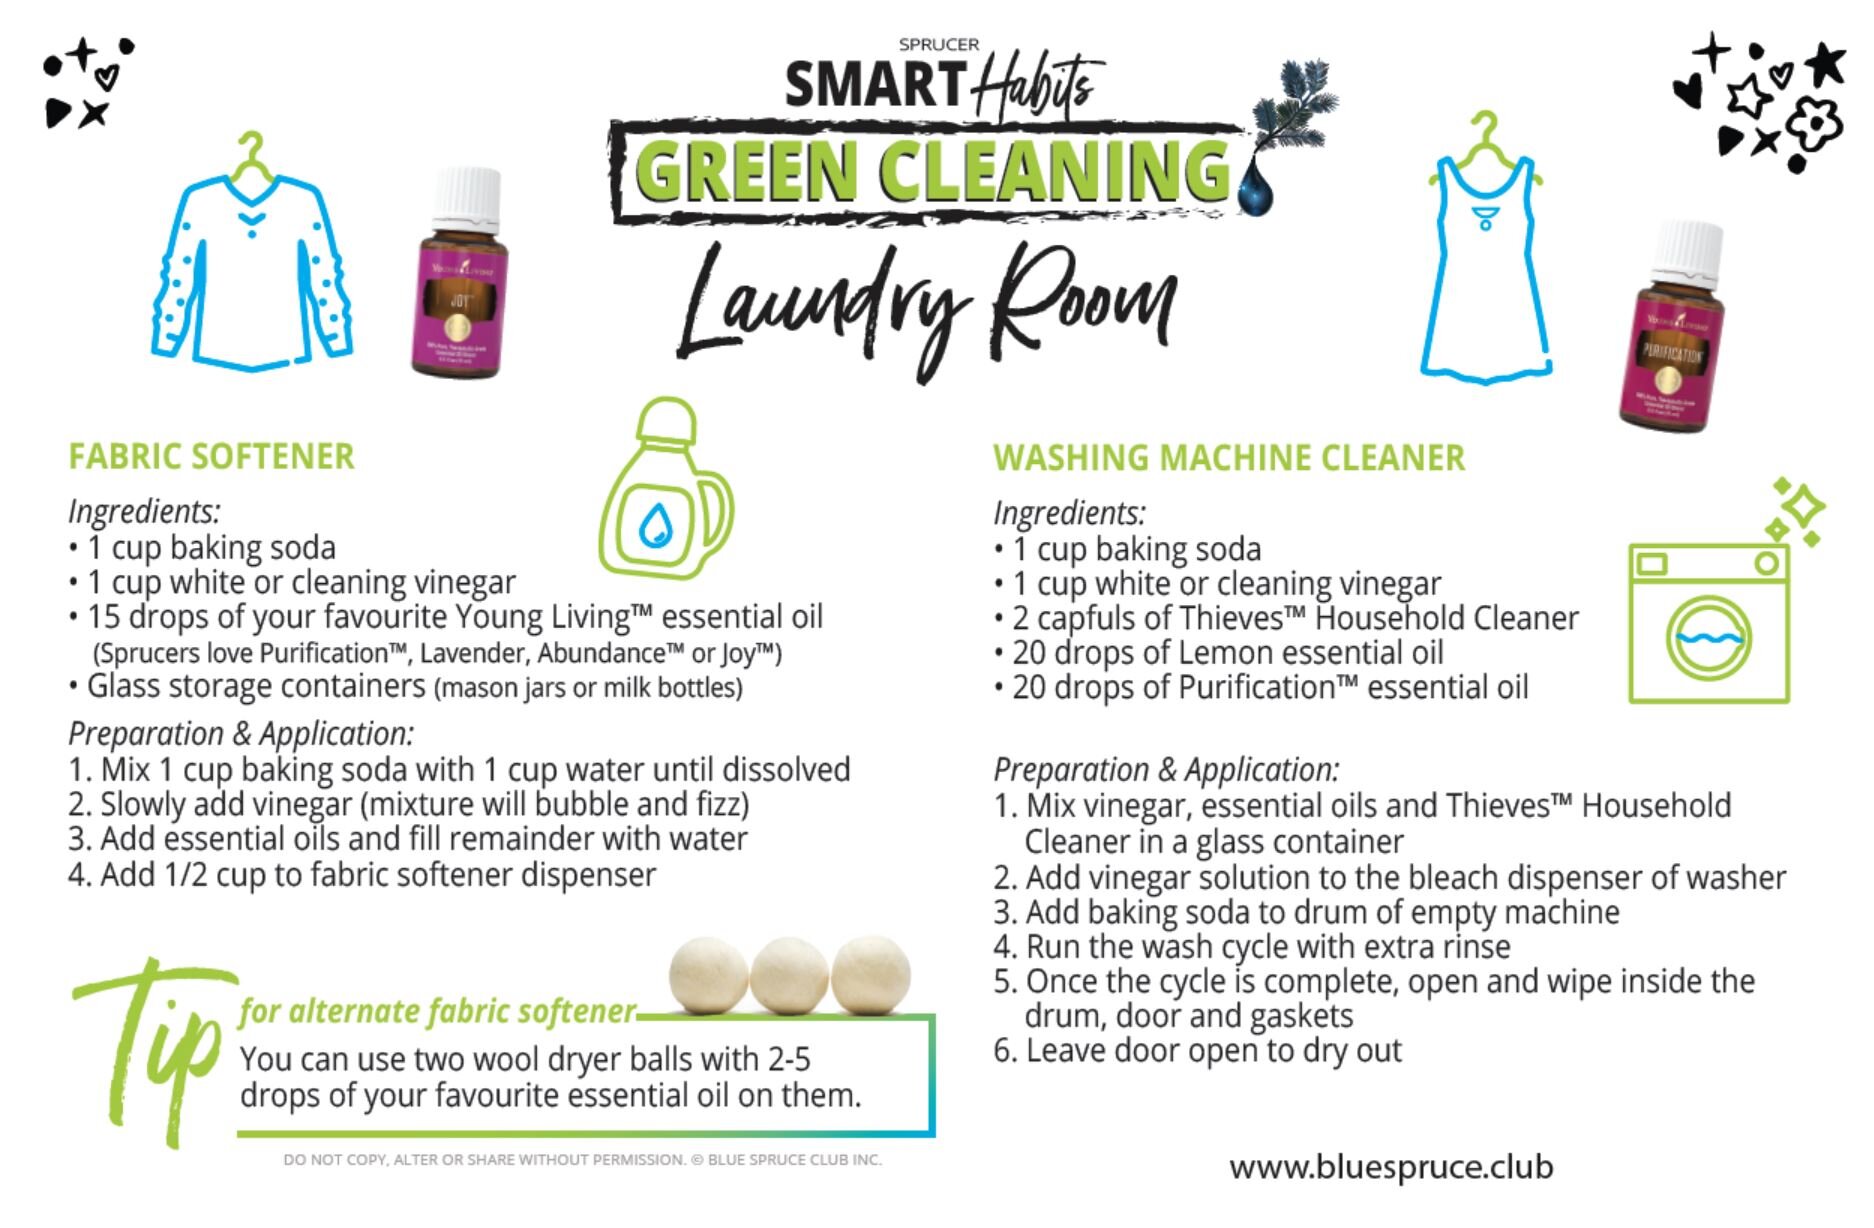 SMART HABITS_Green Up Clean Up_Laundry Room_Fabric Softener + Washing Machine Cleaner.jpg